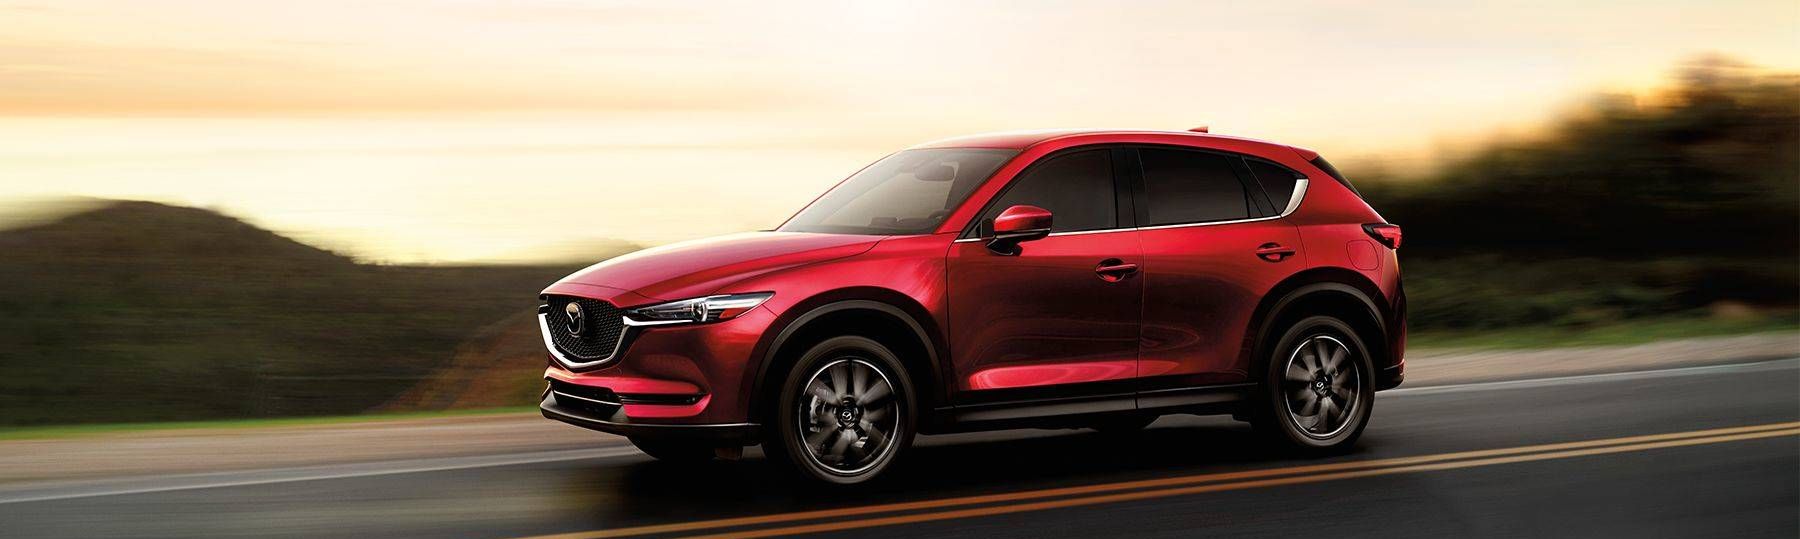 How Remarkable Is The 2021 Mazda CX-9?